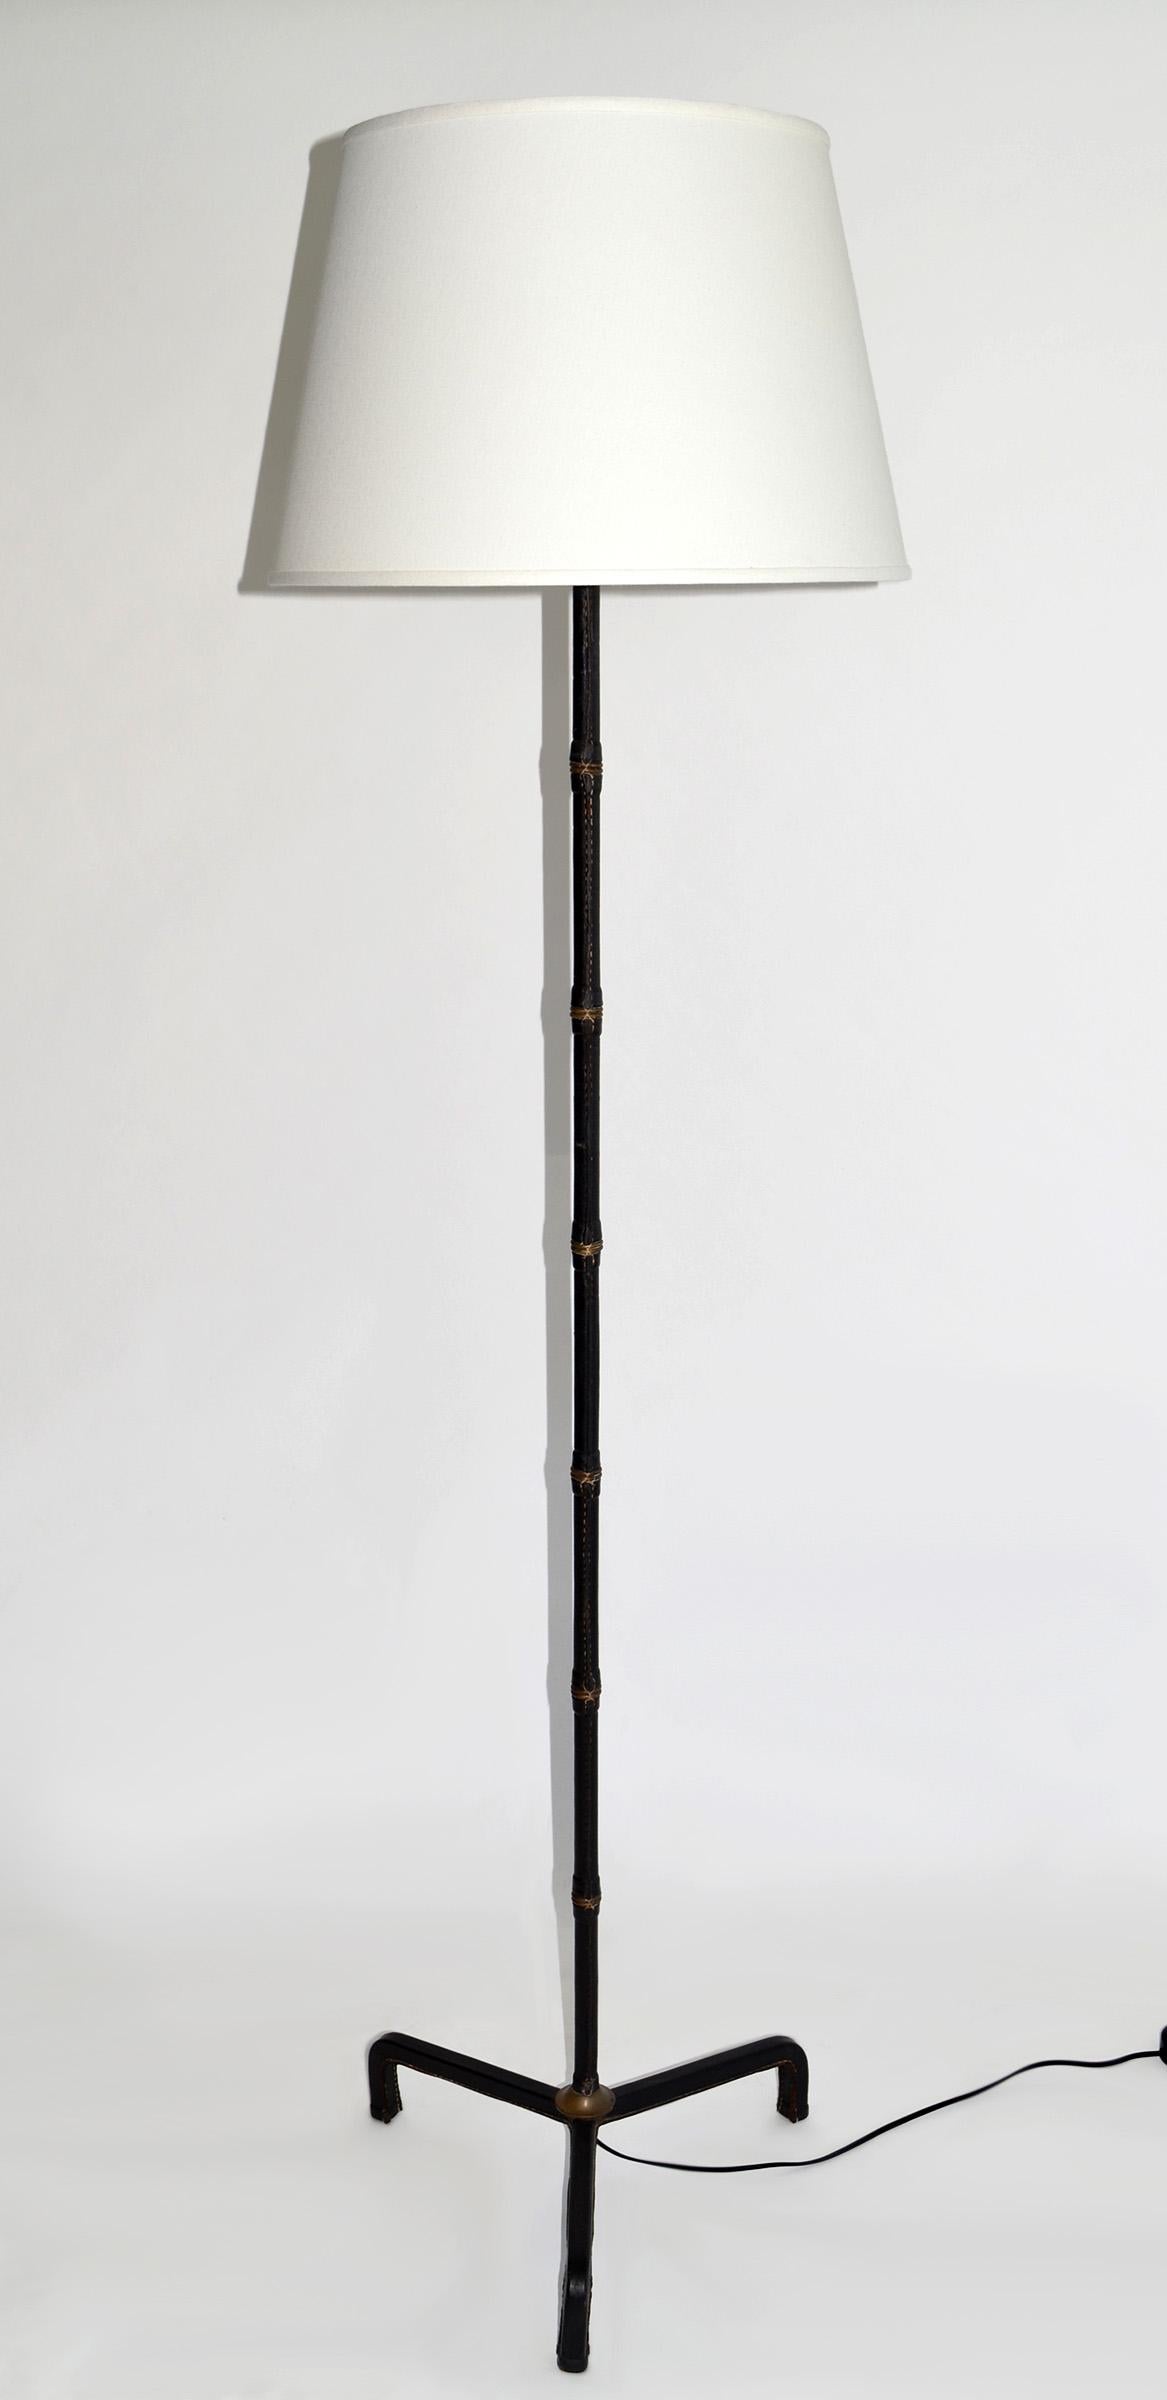 Jacques Adnet Leather wrapped Floor Lamp, France c. 1950
France, c. 1950
saddle-stitched leather, brass
65 x 19 diameter to top of shade. 58 x 18 no shade. 

Good overall condition. Newly wired for American outlets with a single socket for a